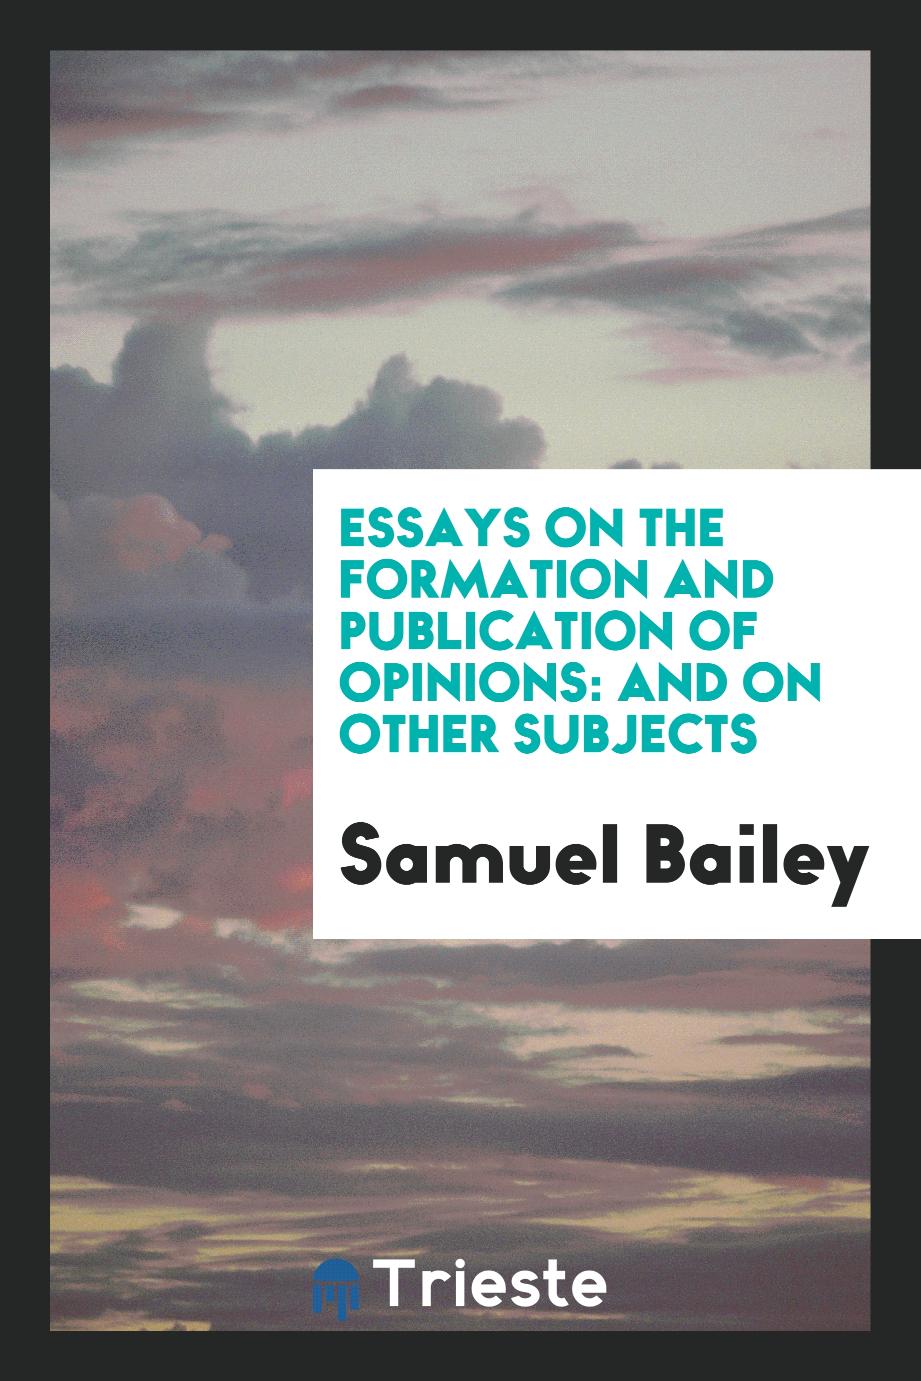 Essays on the formation and publication of opinions: and on other subjects